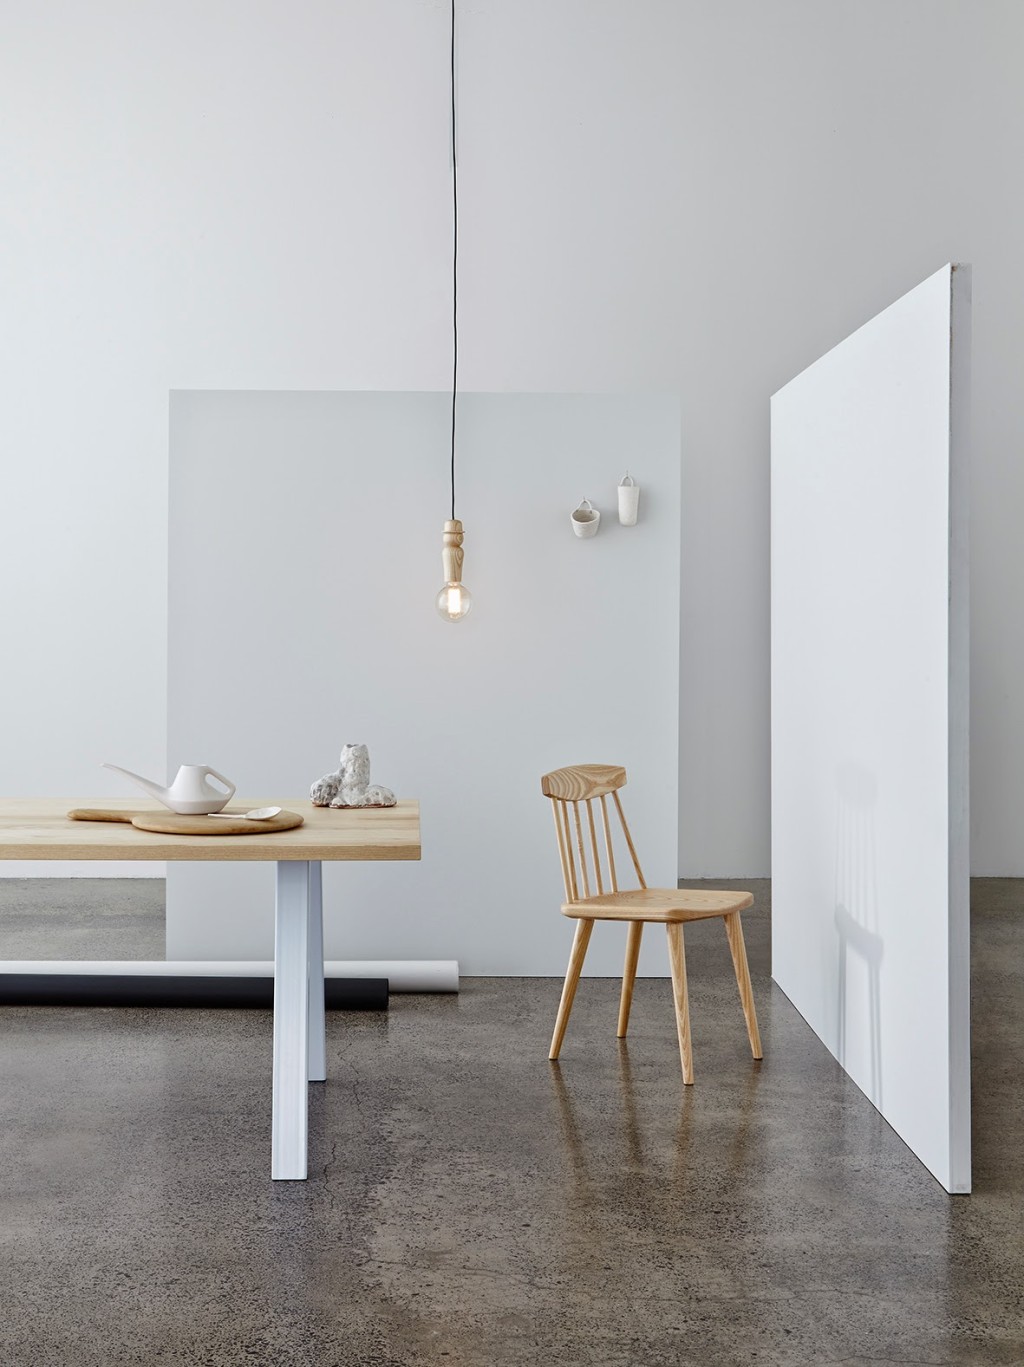 'Bowler' light, 'Splay' table and 'Nordic' chair by Timothy John for Paper Plane. Photograph by Toaki Okano. 